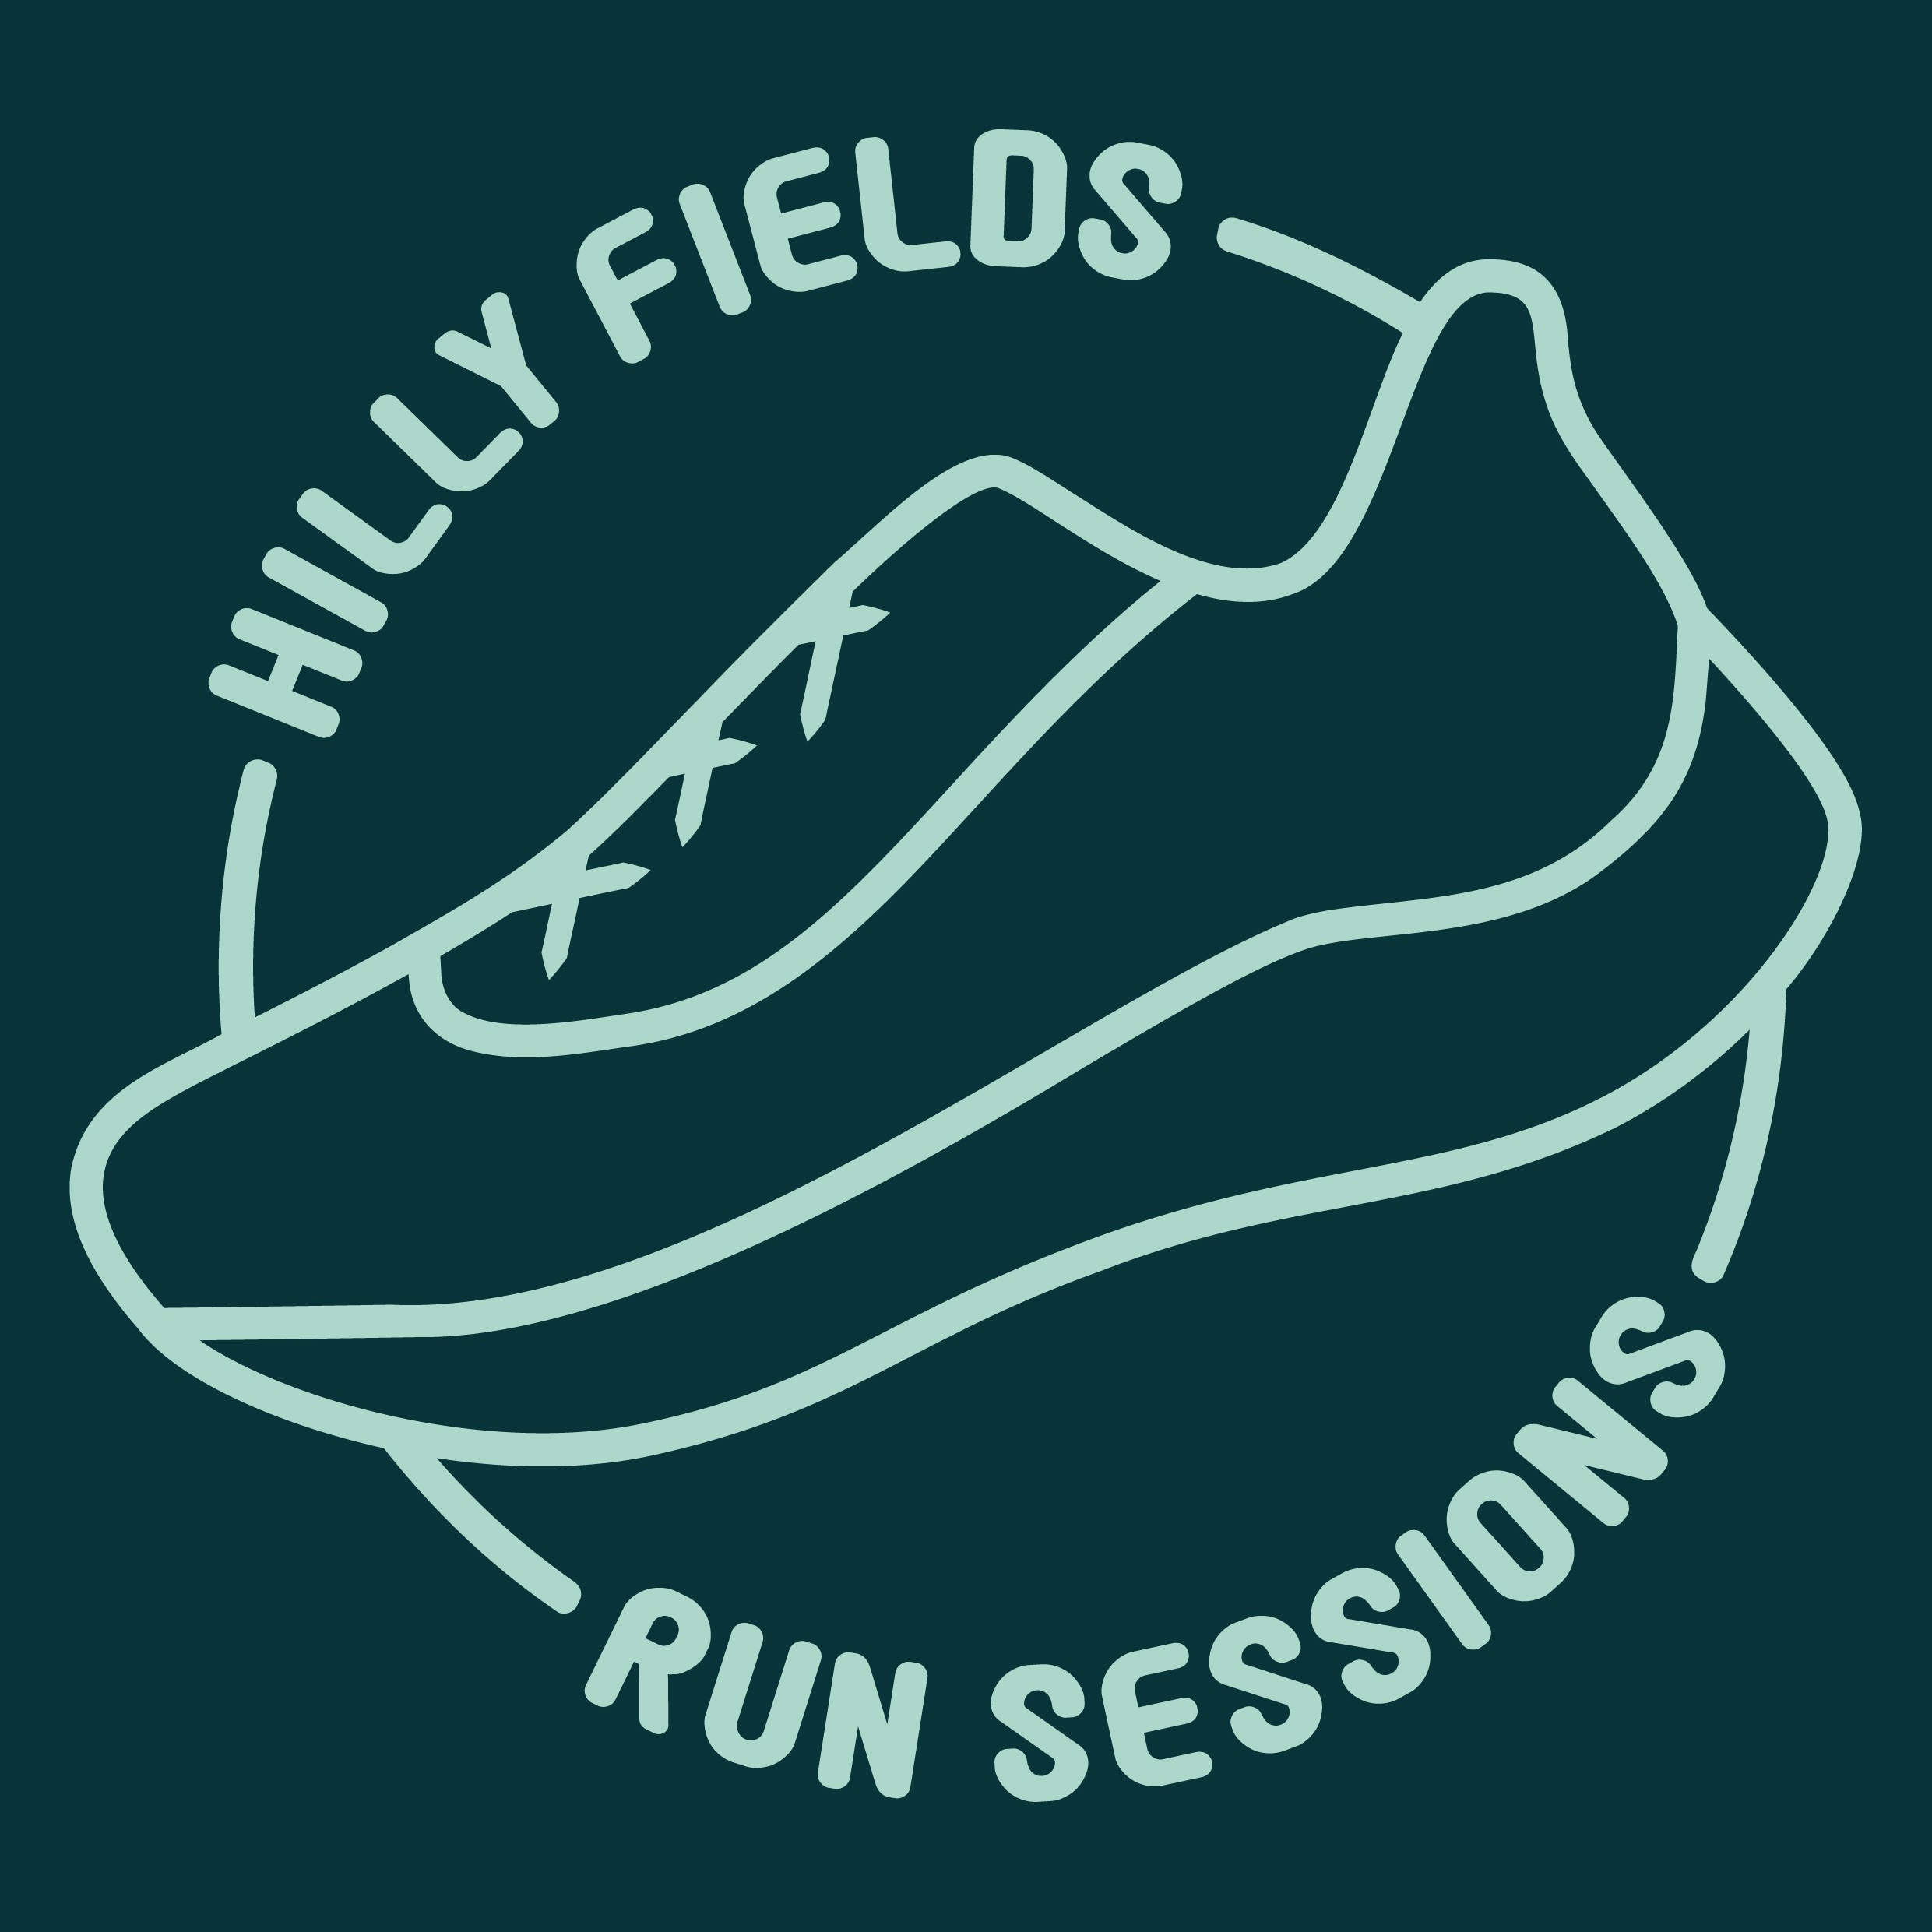 Hilly Fields Run Sessions logo